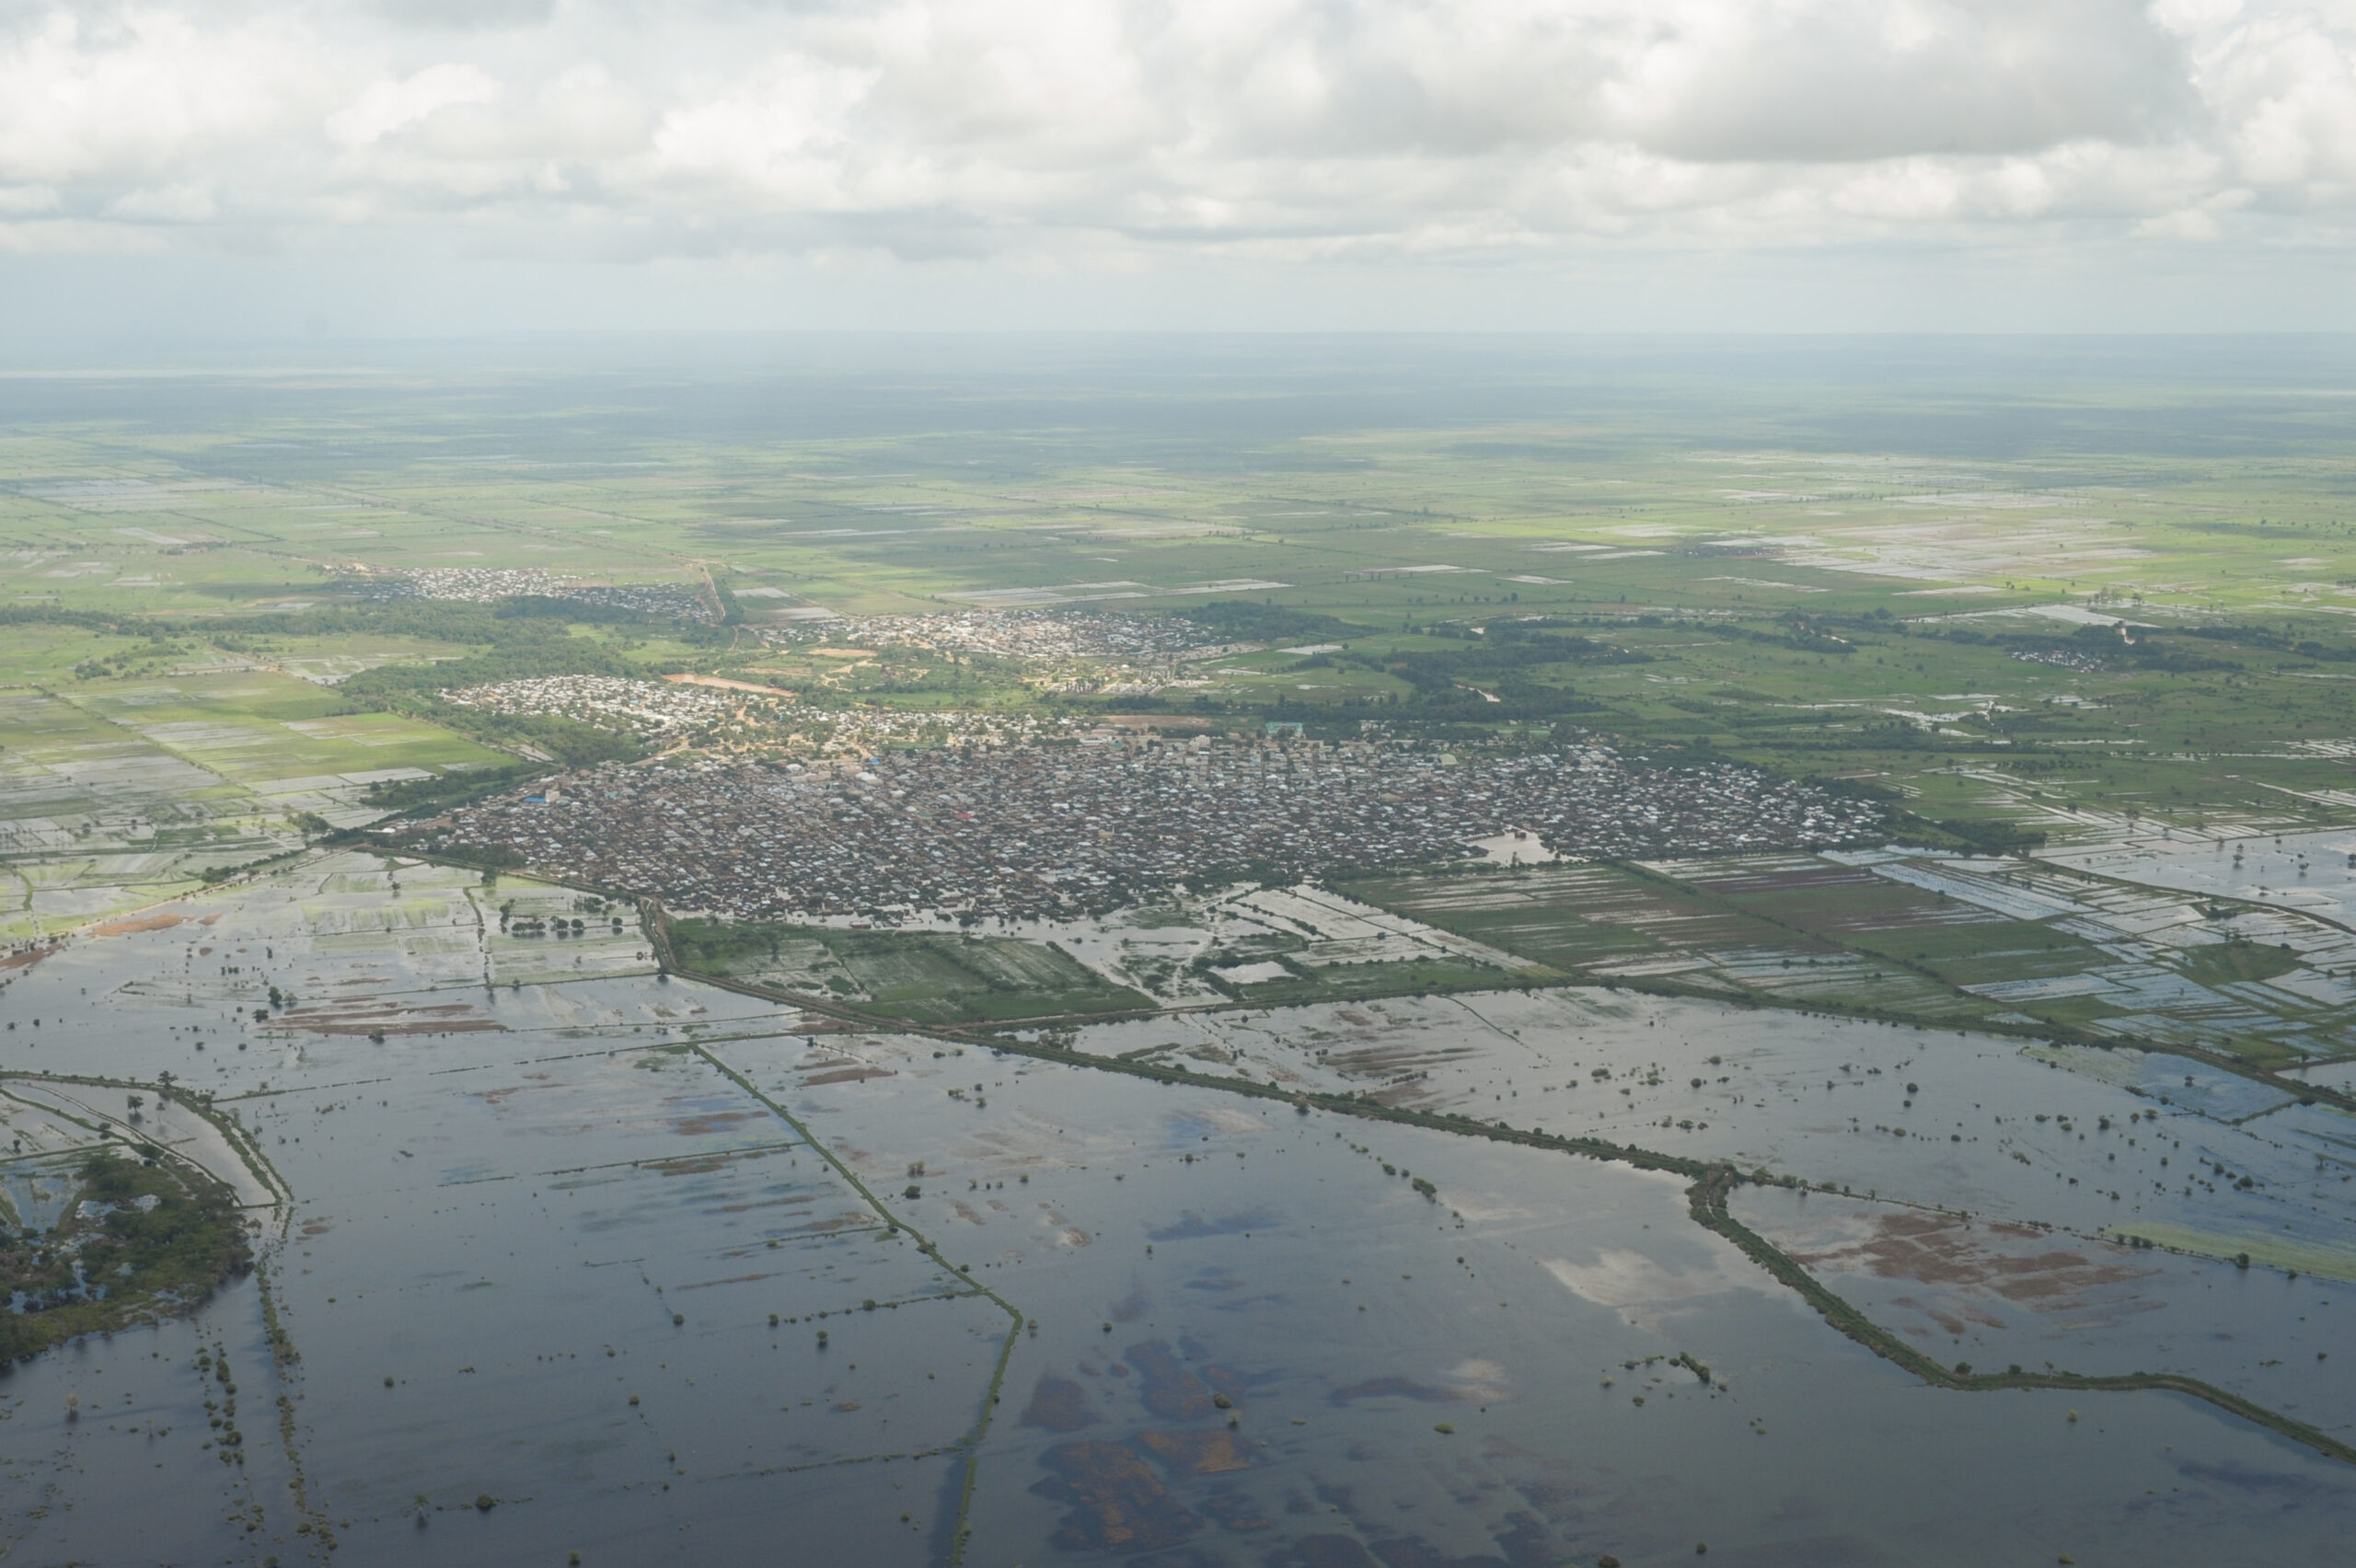 An aerial view of flooding next to a town.